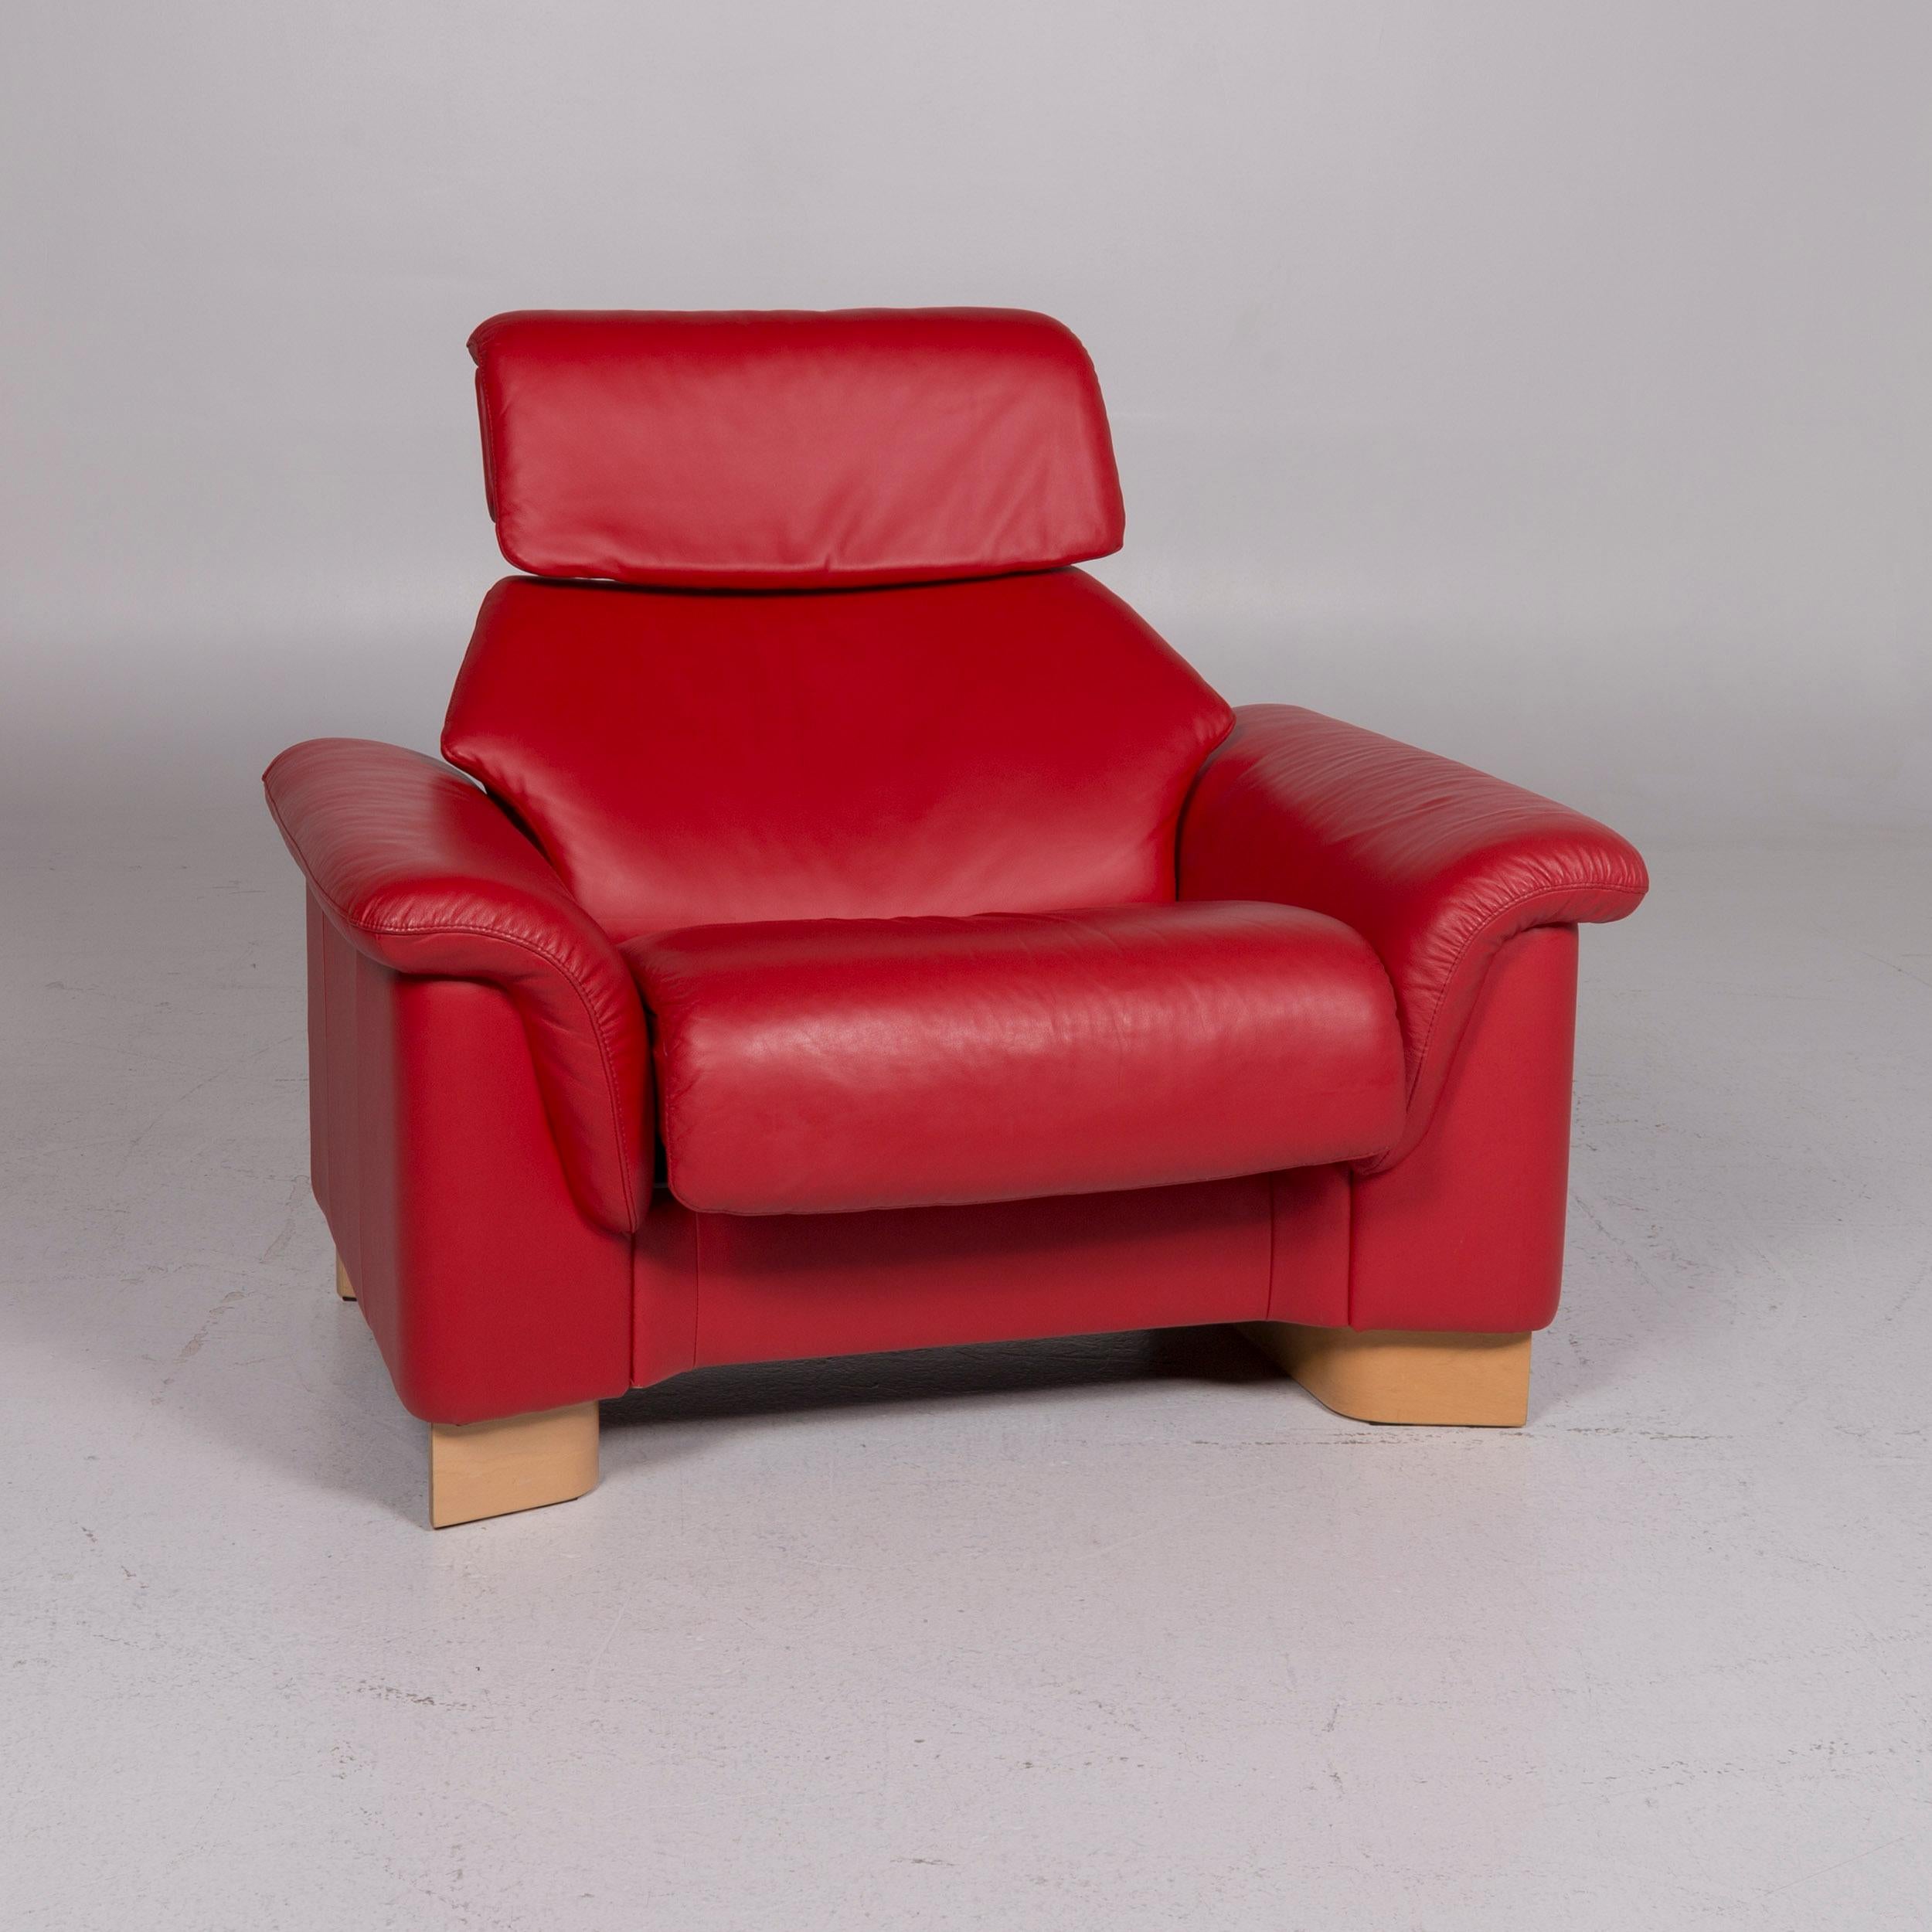 We bring to you a Stressless leather armchair red.

Product measurements in centimetres:
 

Depth 85
Width 118
Height 104
Seat-height 46
Rest-height 59
Seat-depth 52
Seat-width 66
Back-height 60.

  